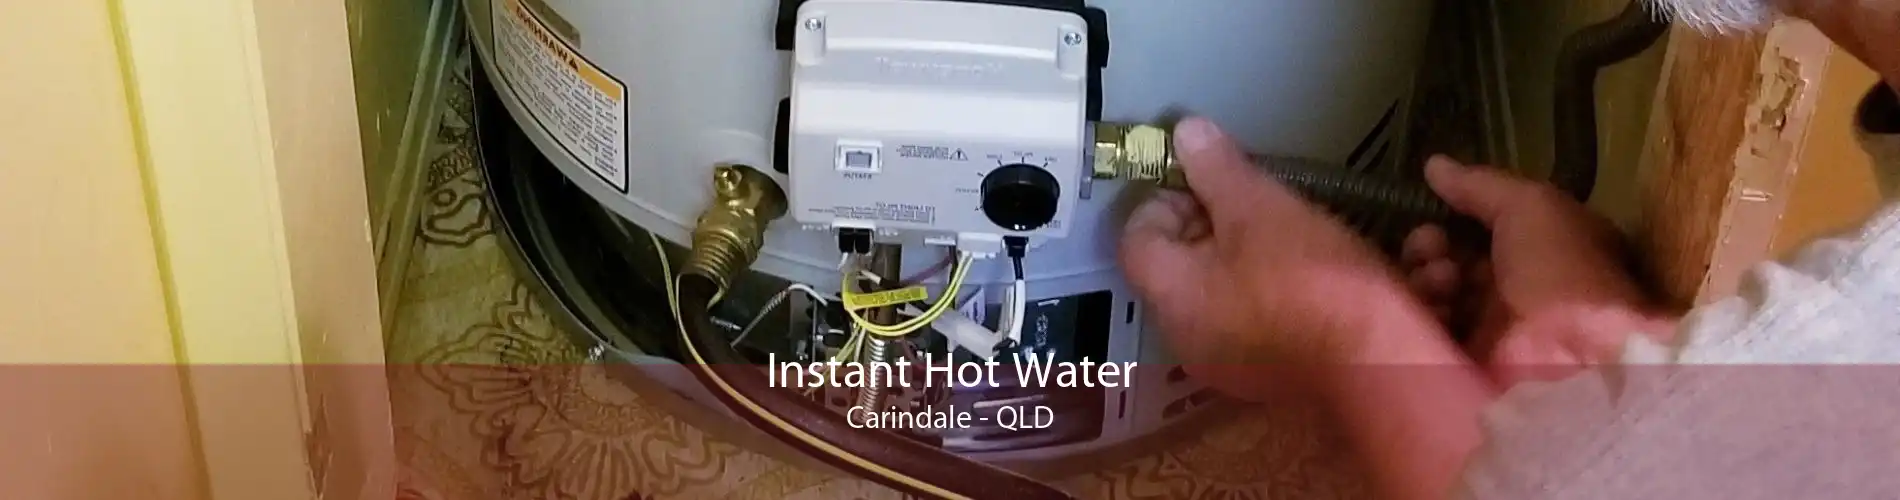 Instant Hot Water Carindale - QLD